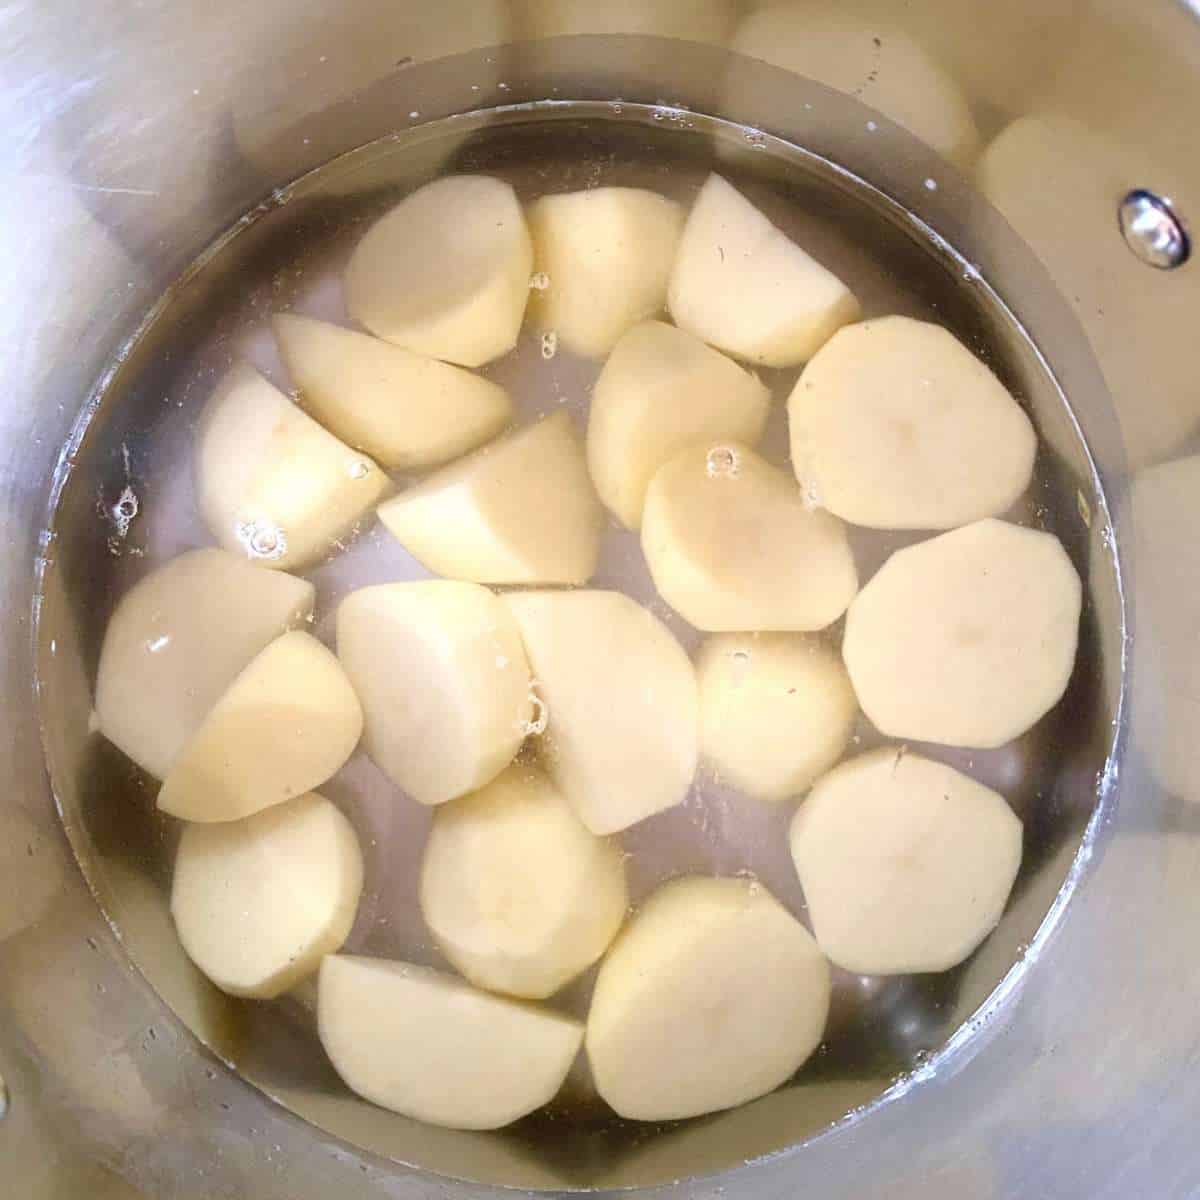 cut up potatoes covered in water in a stock pot.